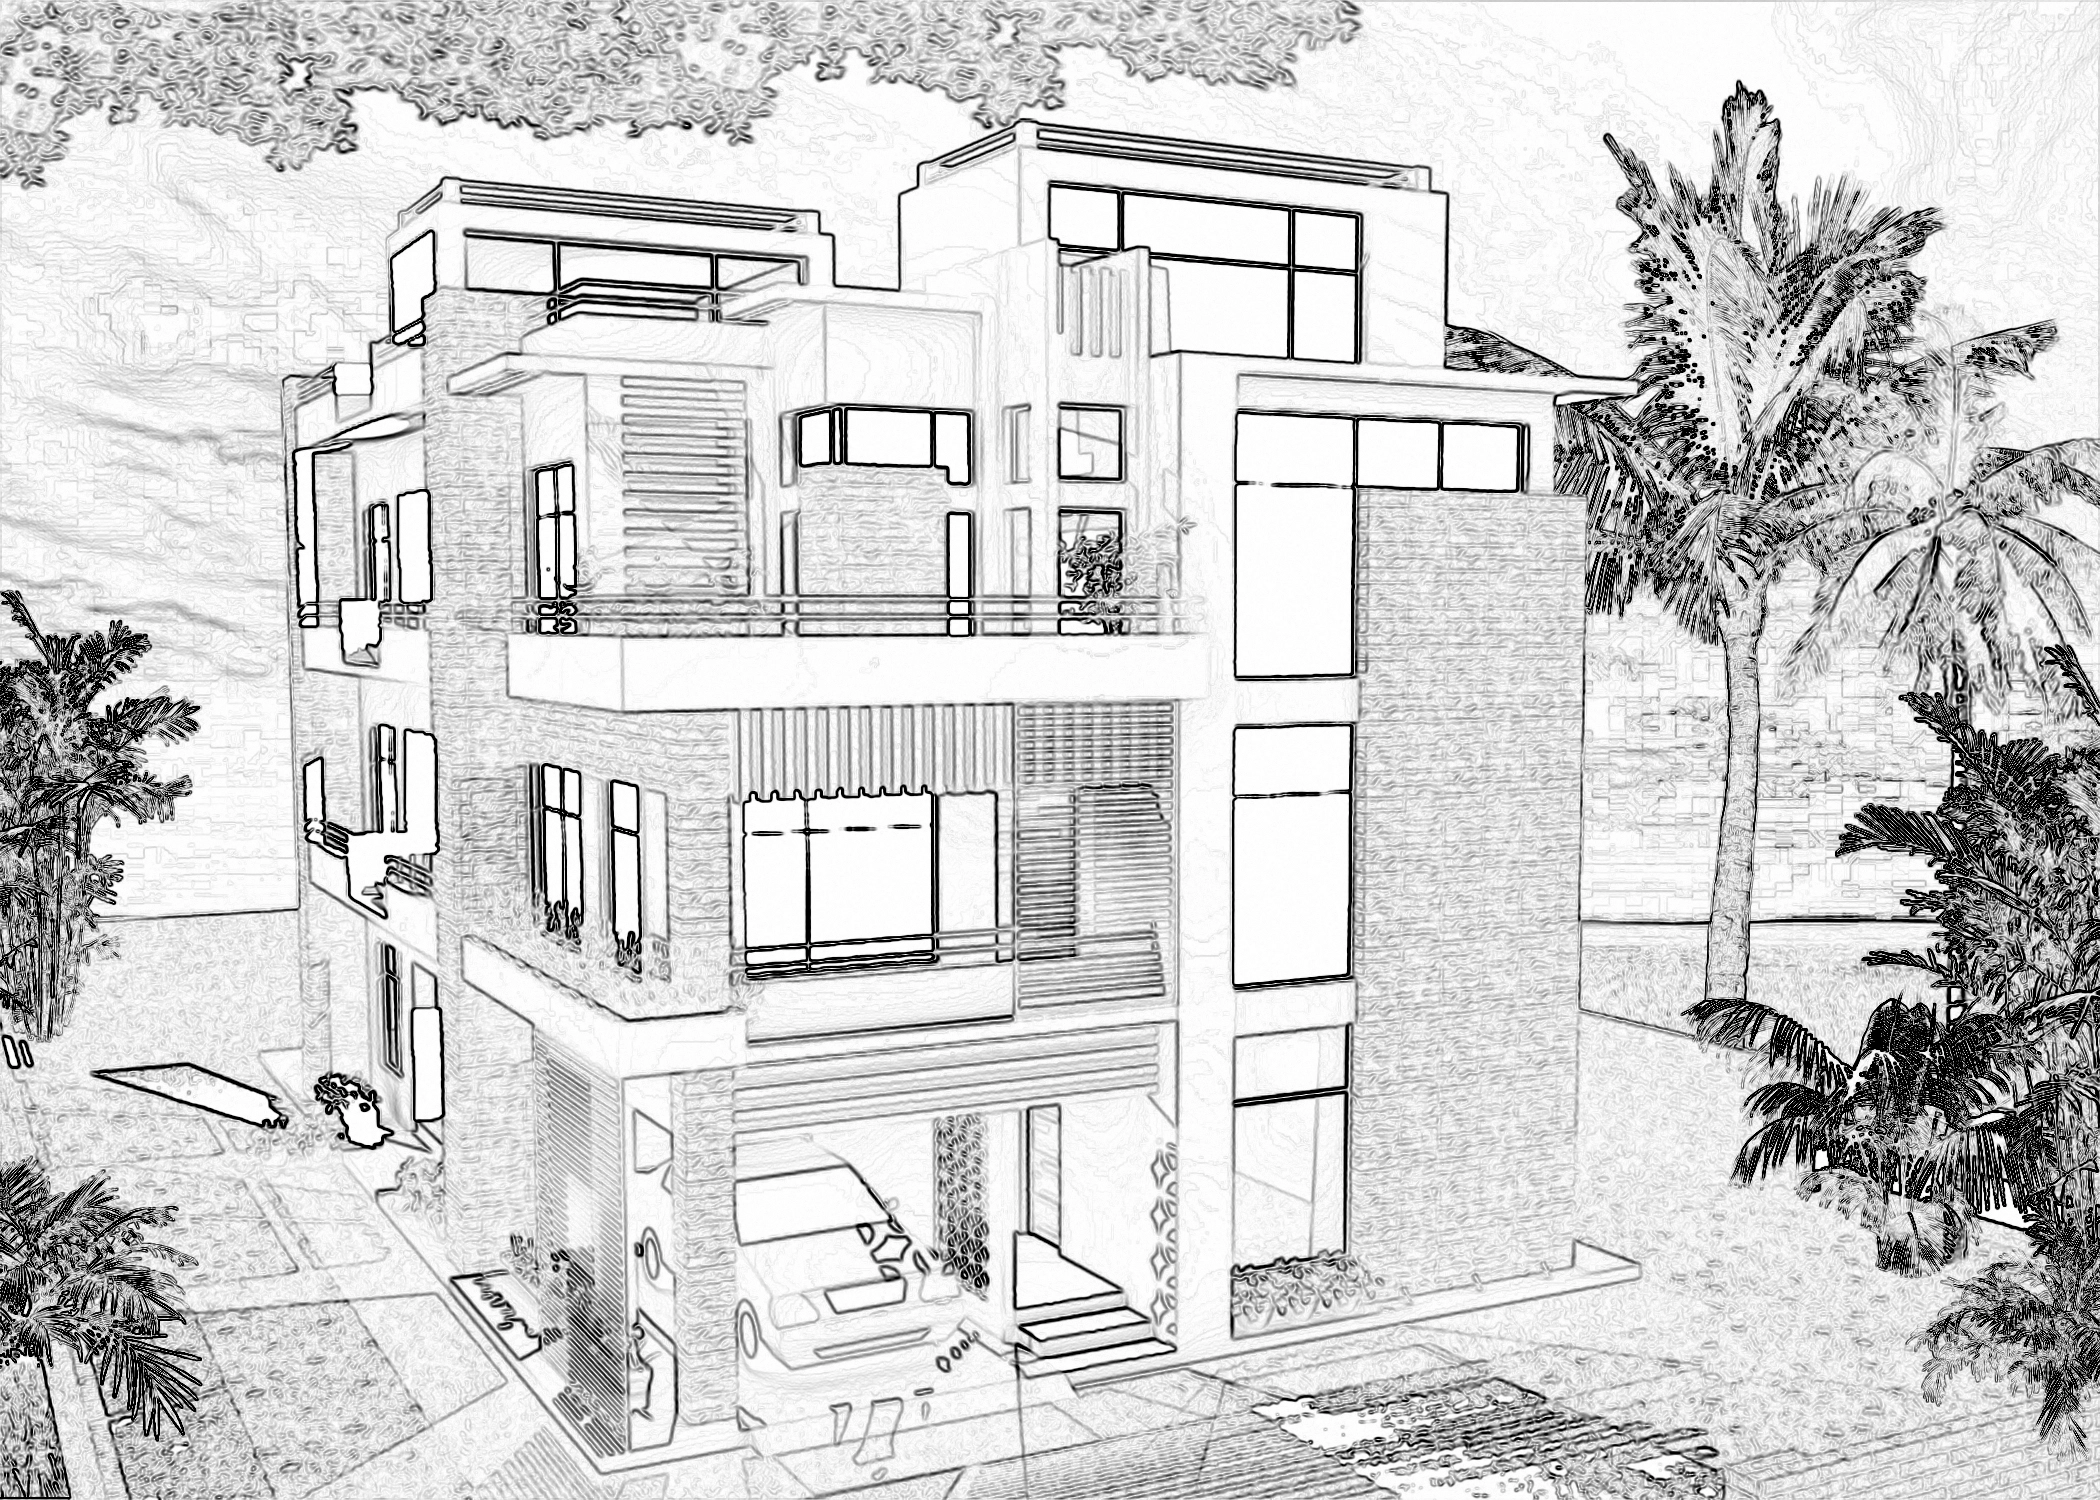 single family home design by studio 89 architect in guwahati assam